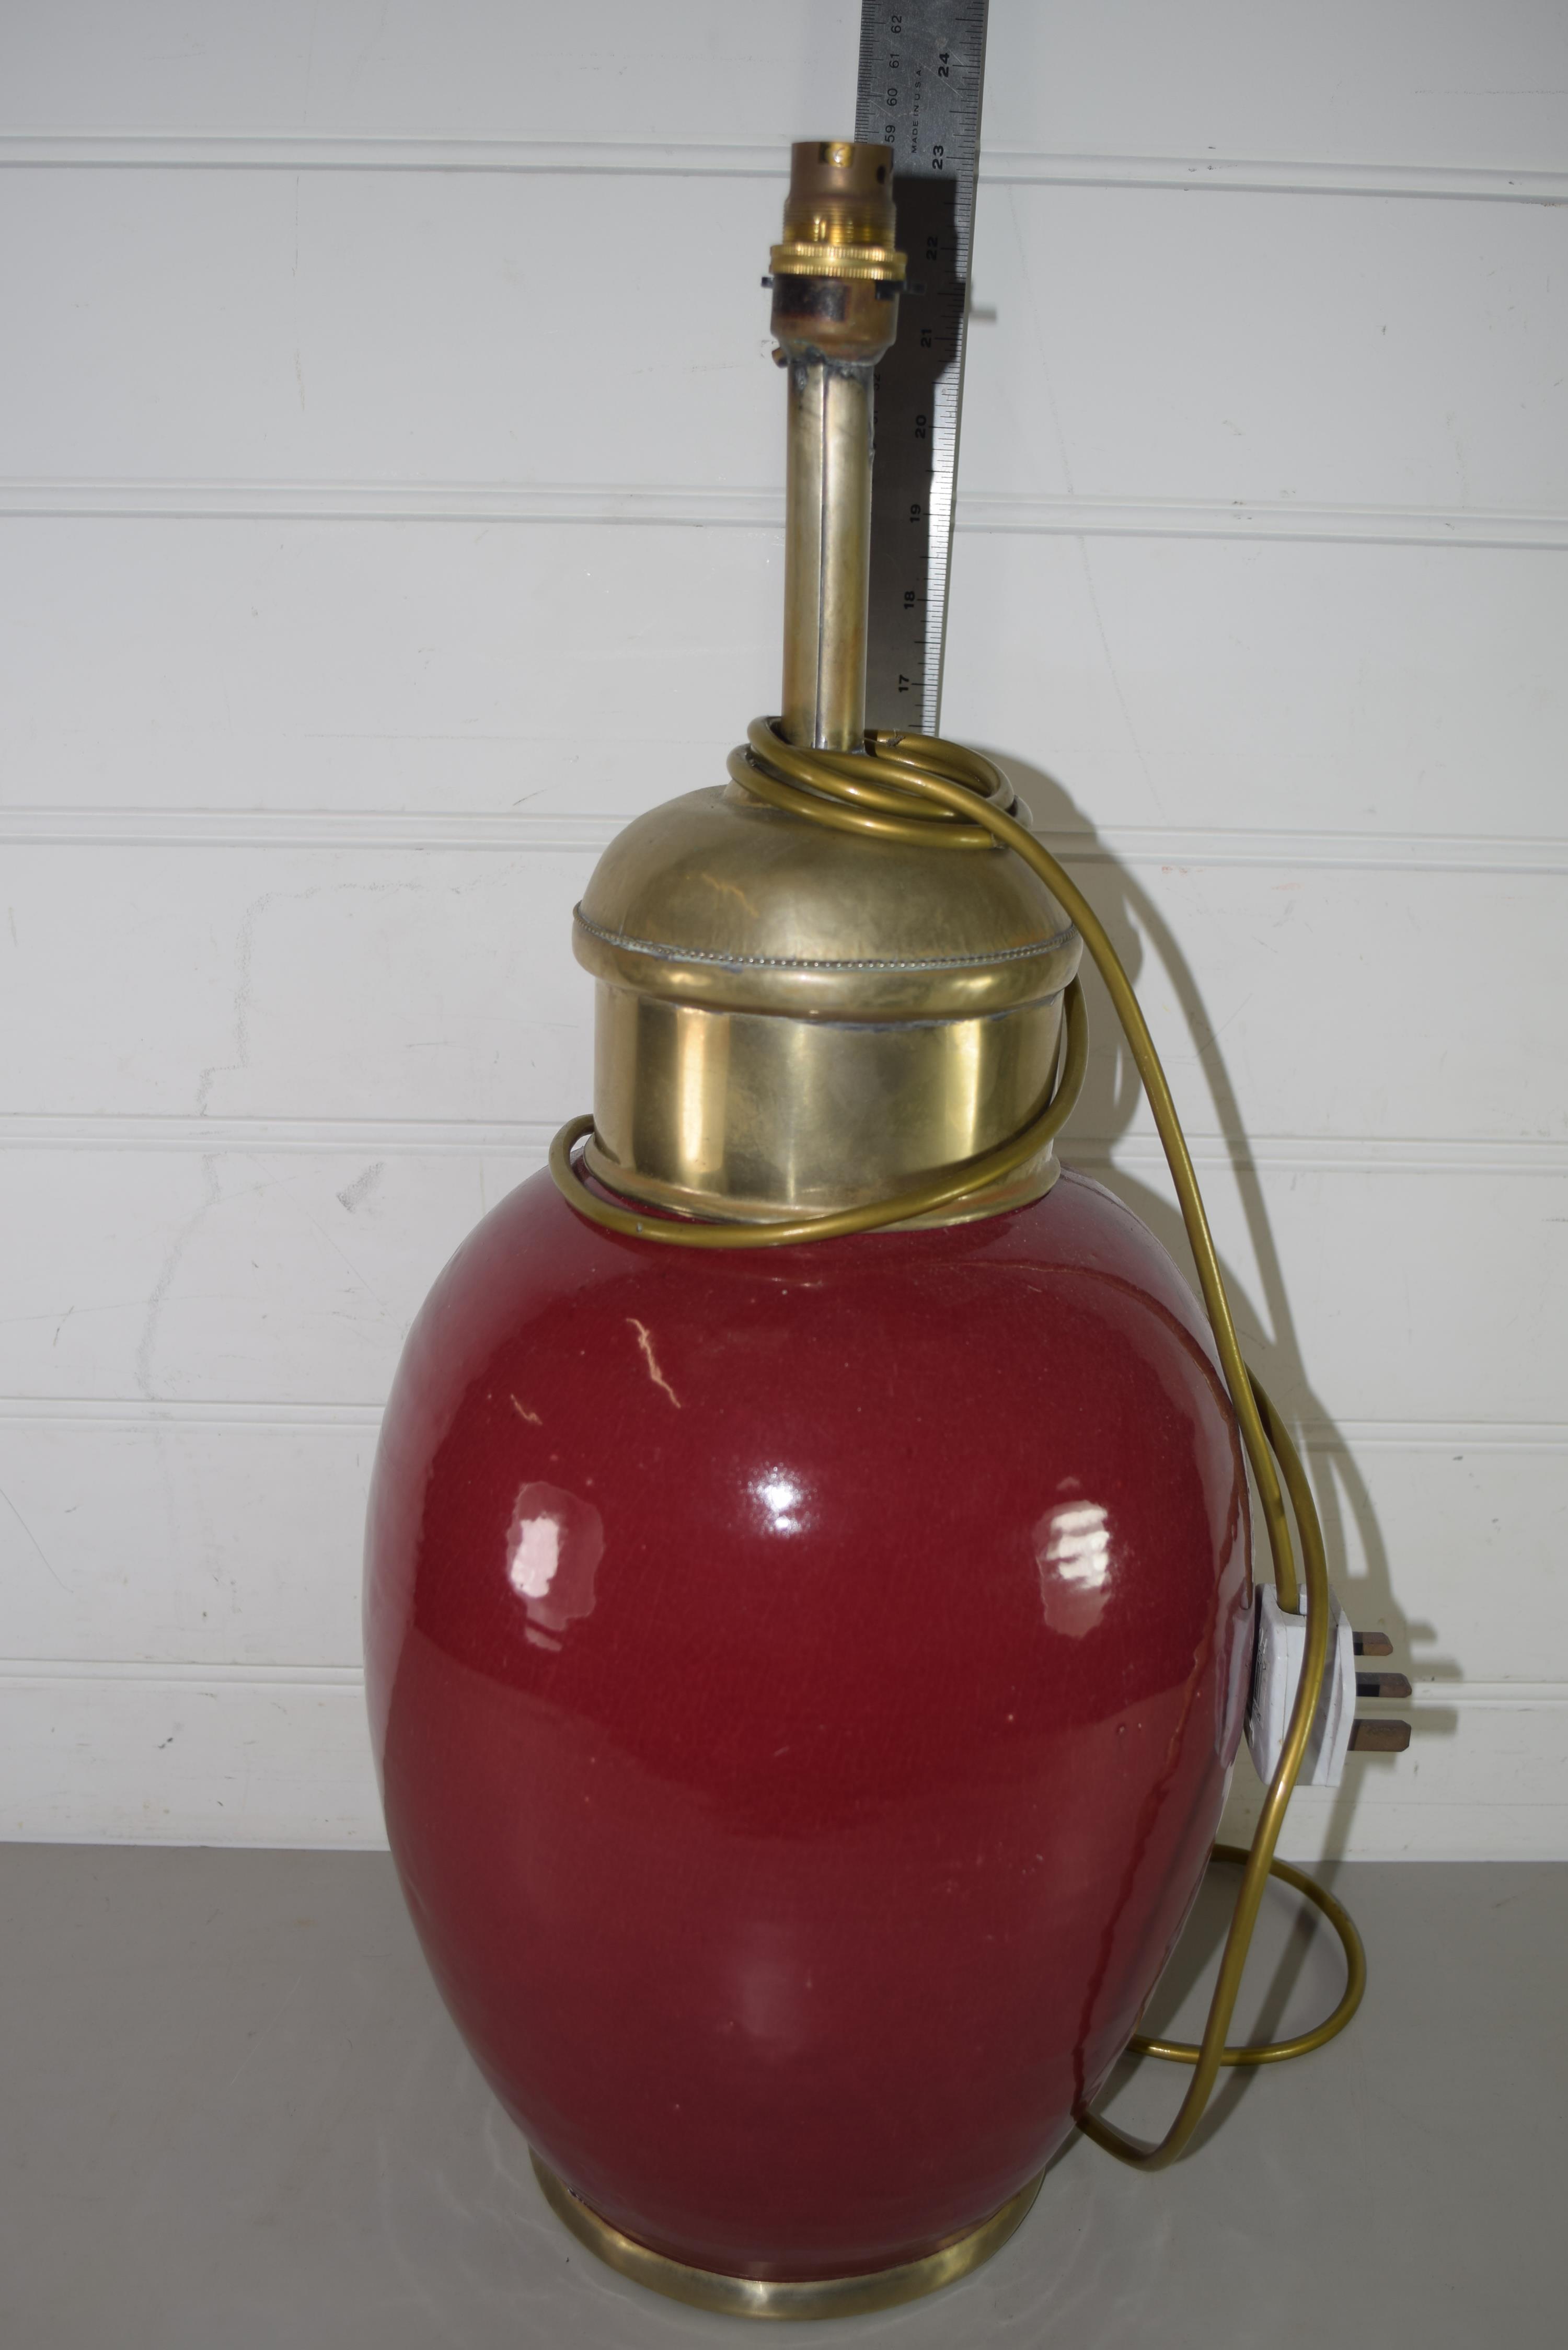 POTTERY FLAMBE TABLE LAMP